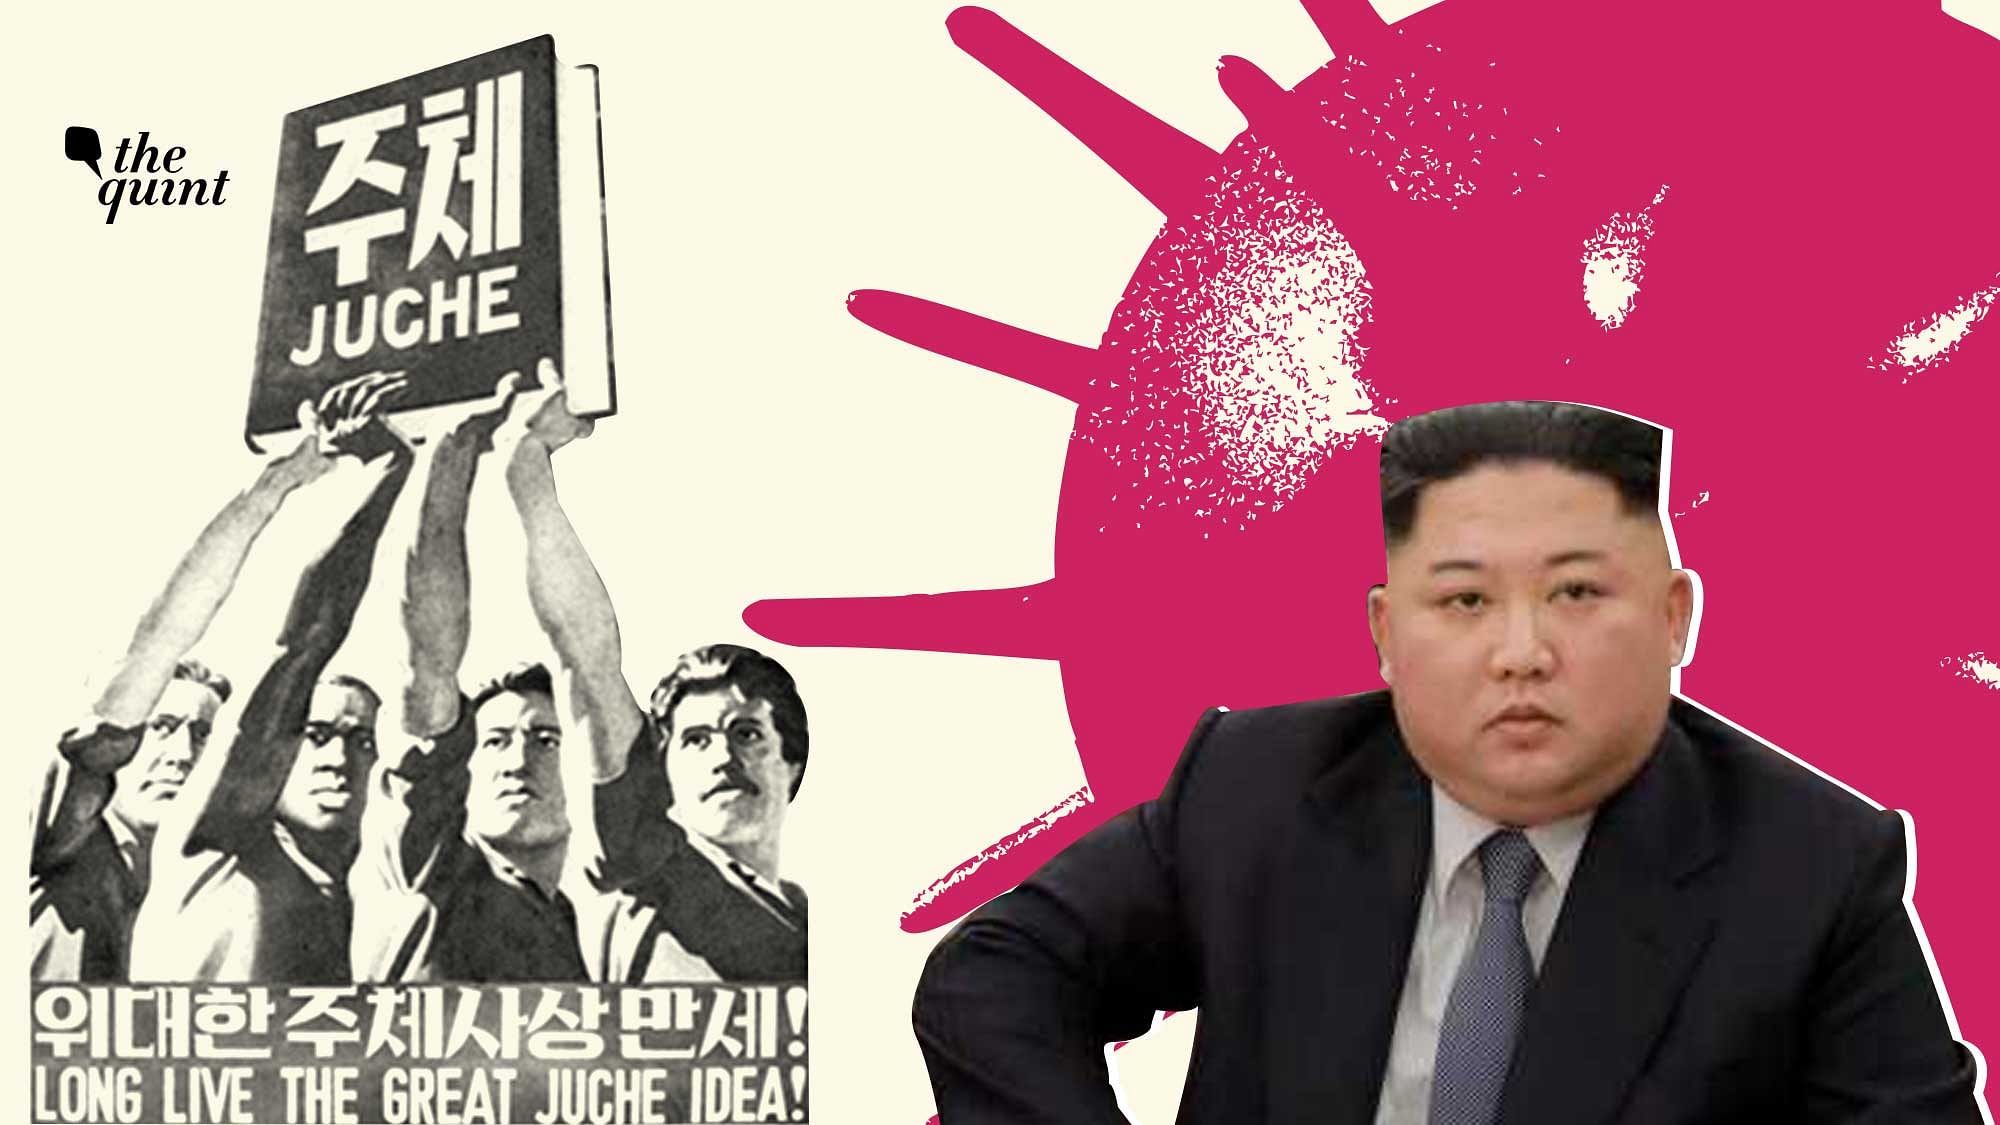 ‘Juche’ lies at heart of North Korean life and one that has granted complete legitimacy to the government of Kim Jong-Un, his father Kim Jong-Il and grandfather Kim Il Sung.